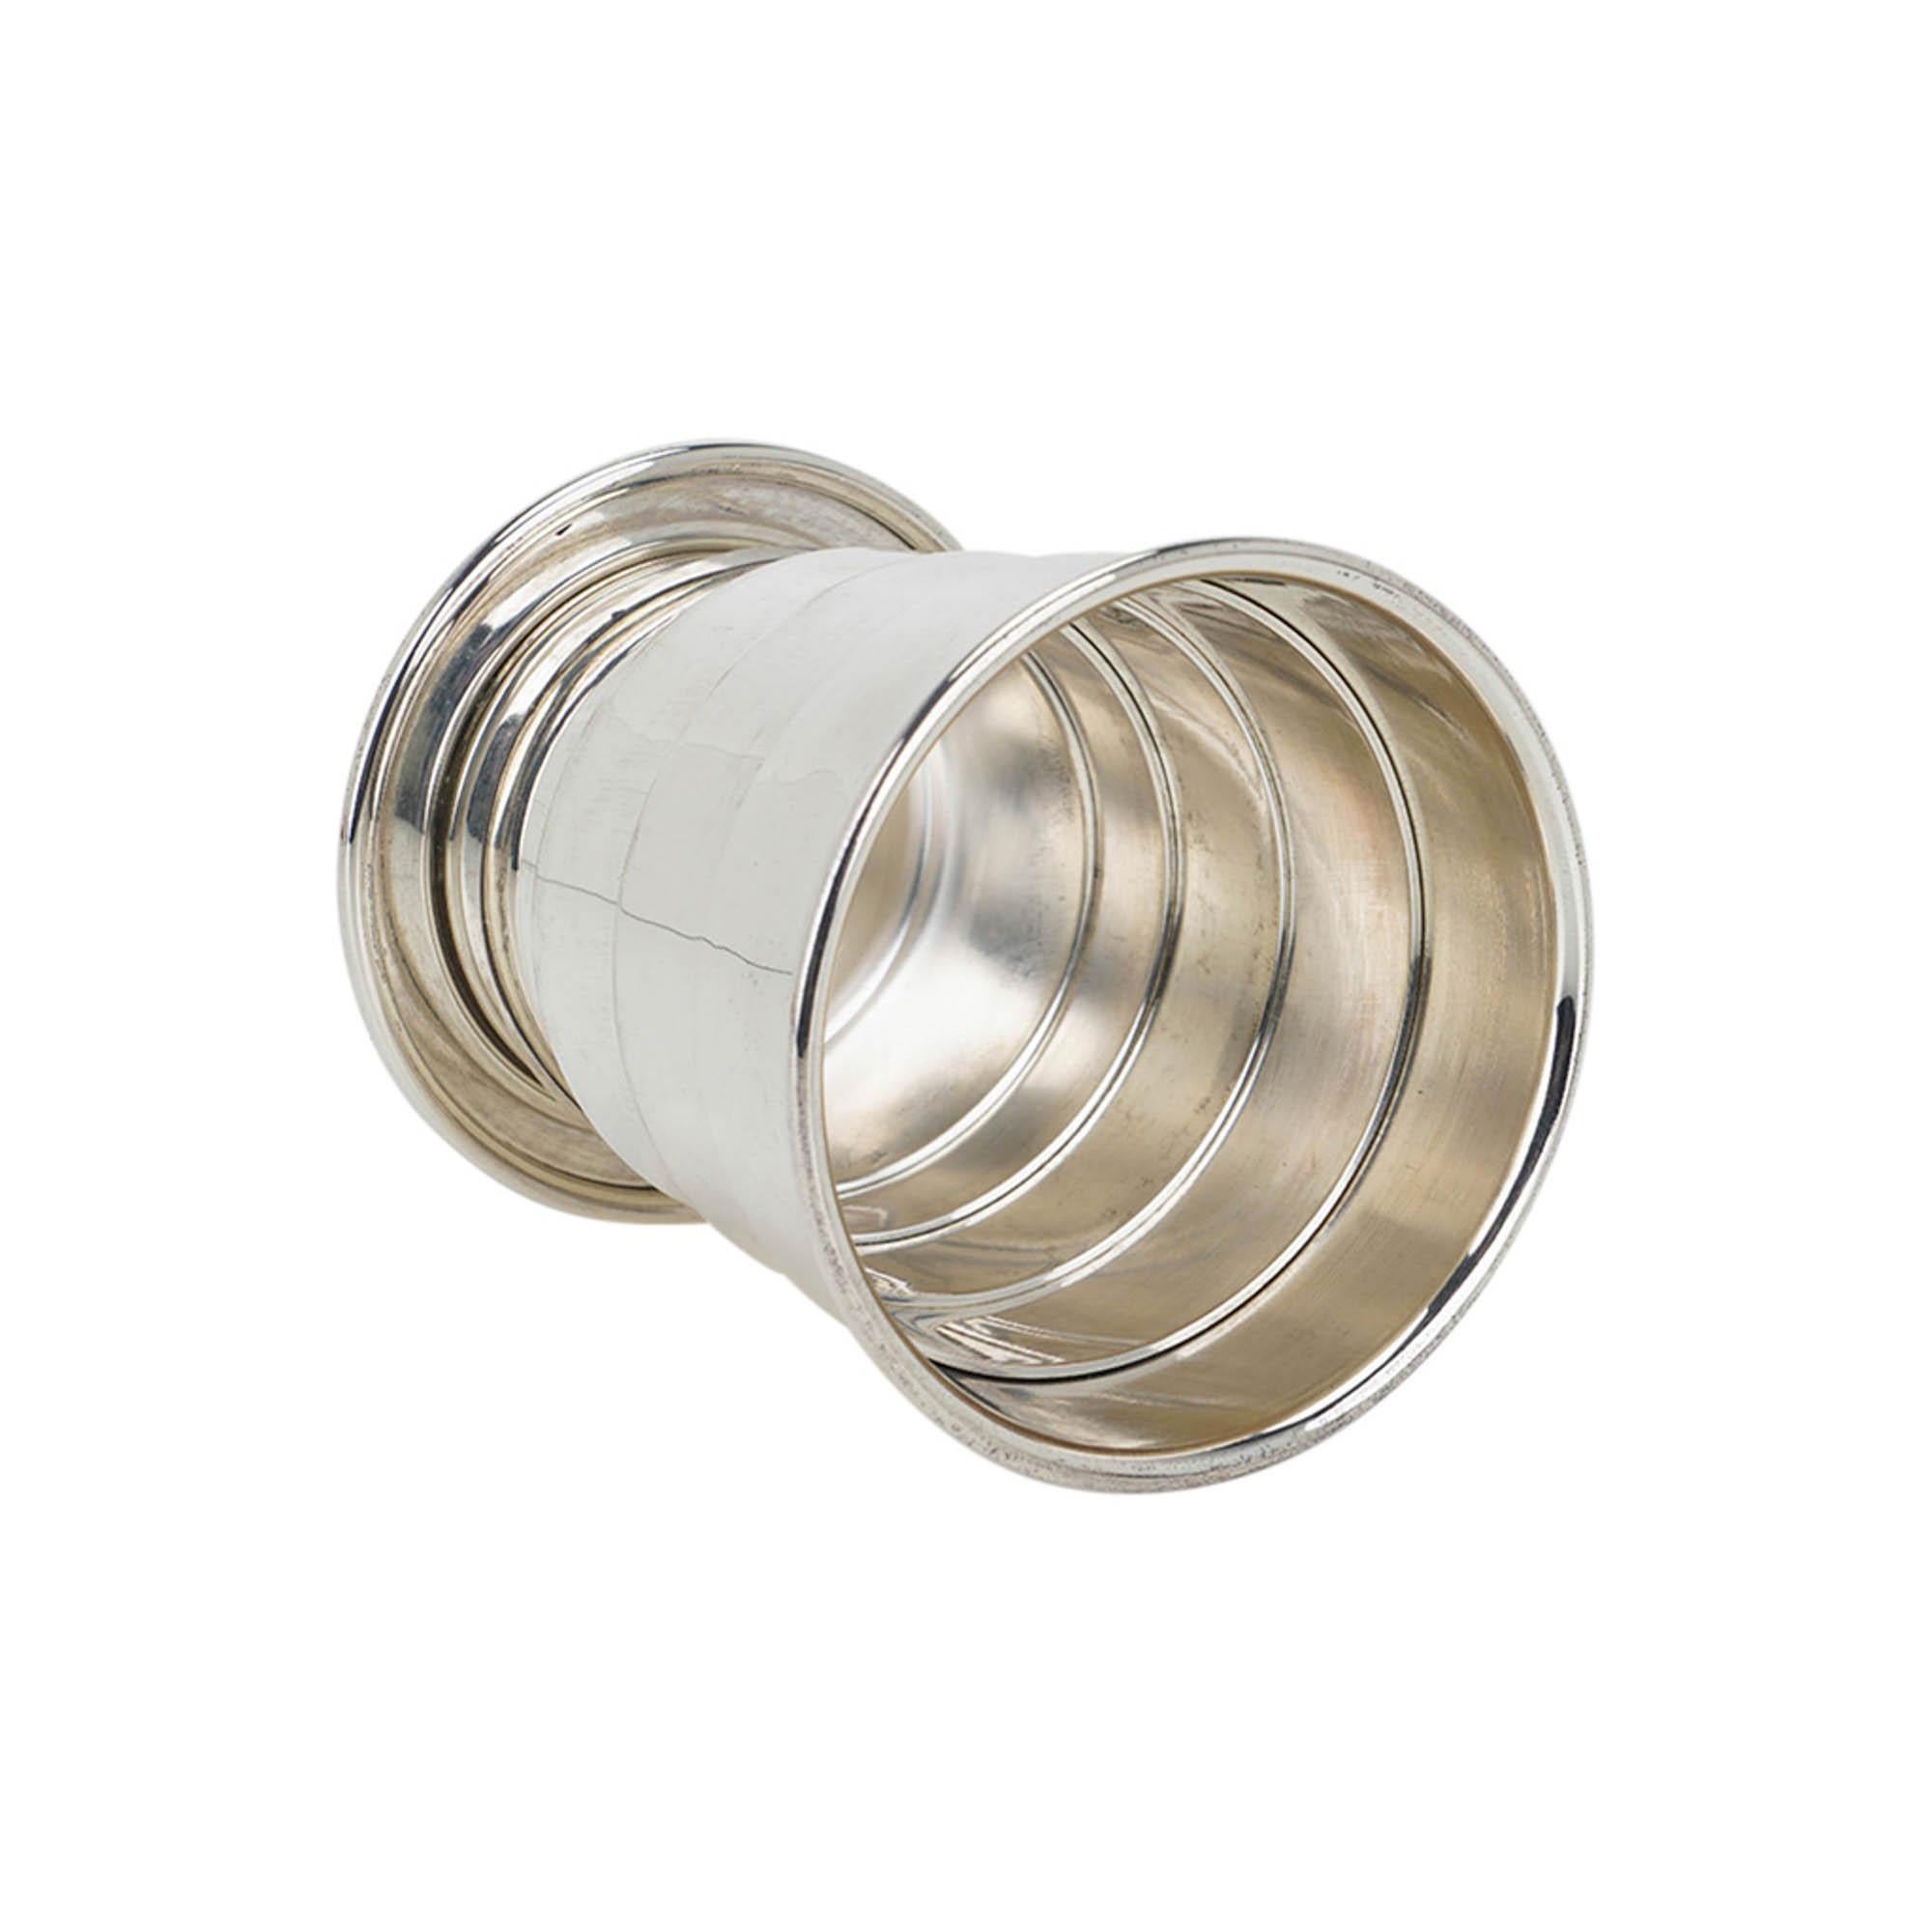 Mightychic offers a rare limited edition Hermes Gobelet In The Pocket silver plated collapsible cup.
The cup collapses from 2.75